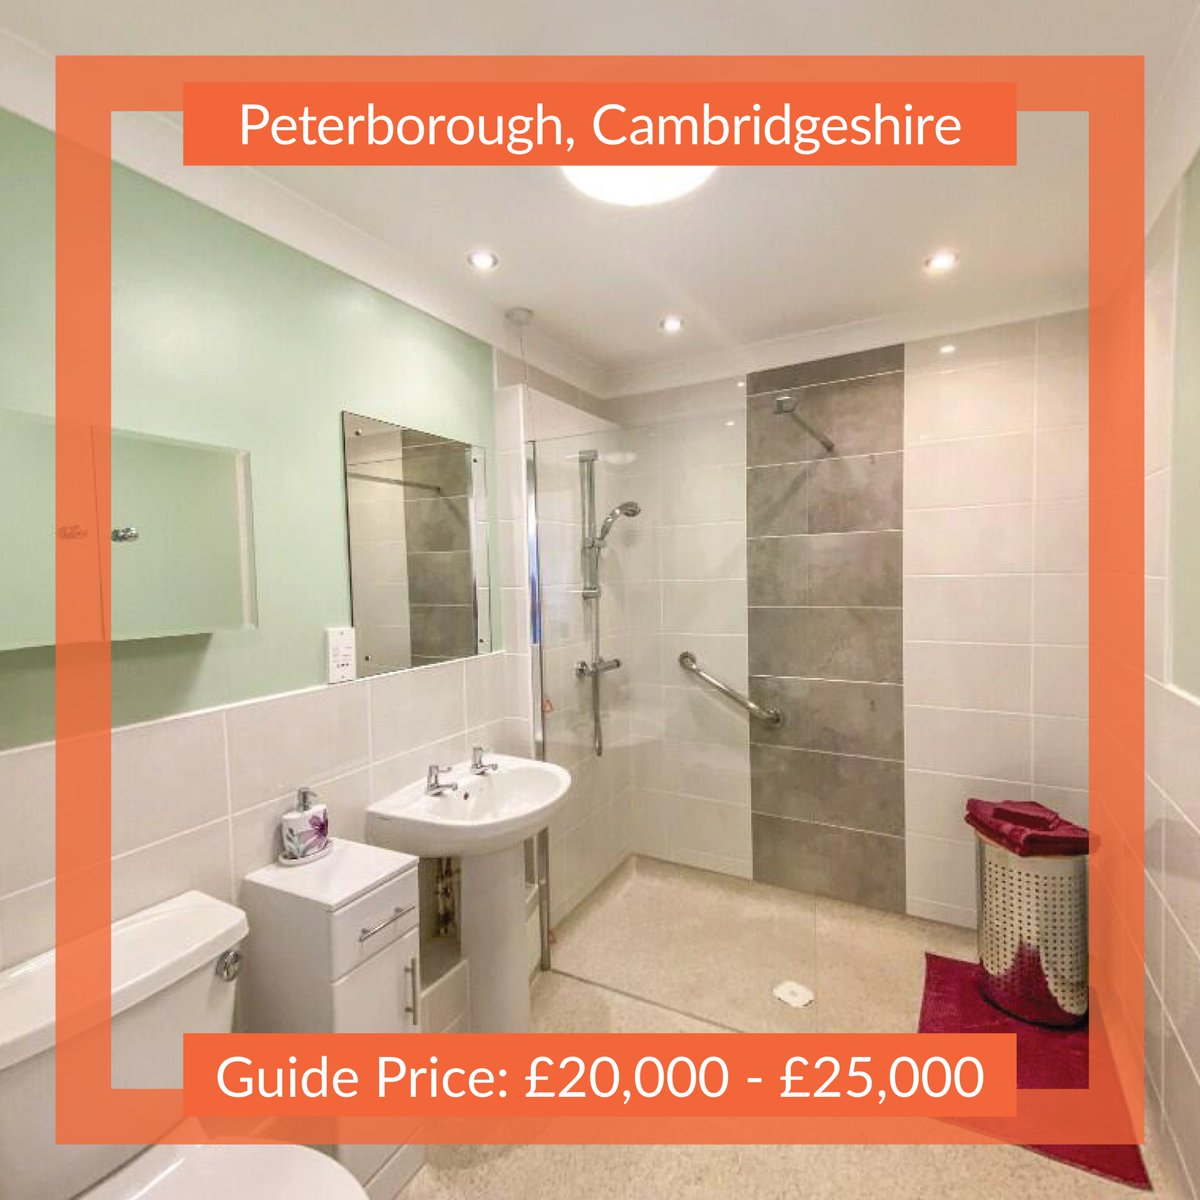 NEW LISTING #Peterborough #Cambridgeshire
Guide: £20,000 - £25,000
Auction: 09/08/23
Website: whoobid.co.uk/accueil/auctio…

#whoobid #propertyauction #houseauction #auction #property #buytolet #propertyinvestor #quicksale #propertydeals #pricegrowth #mortgage #investment